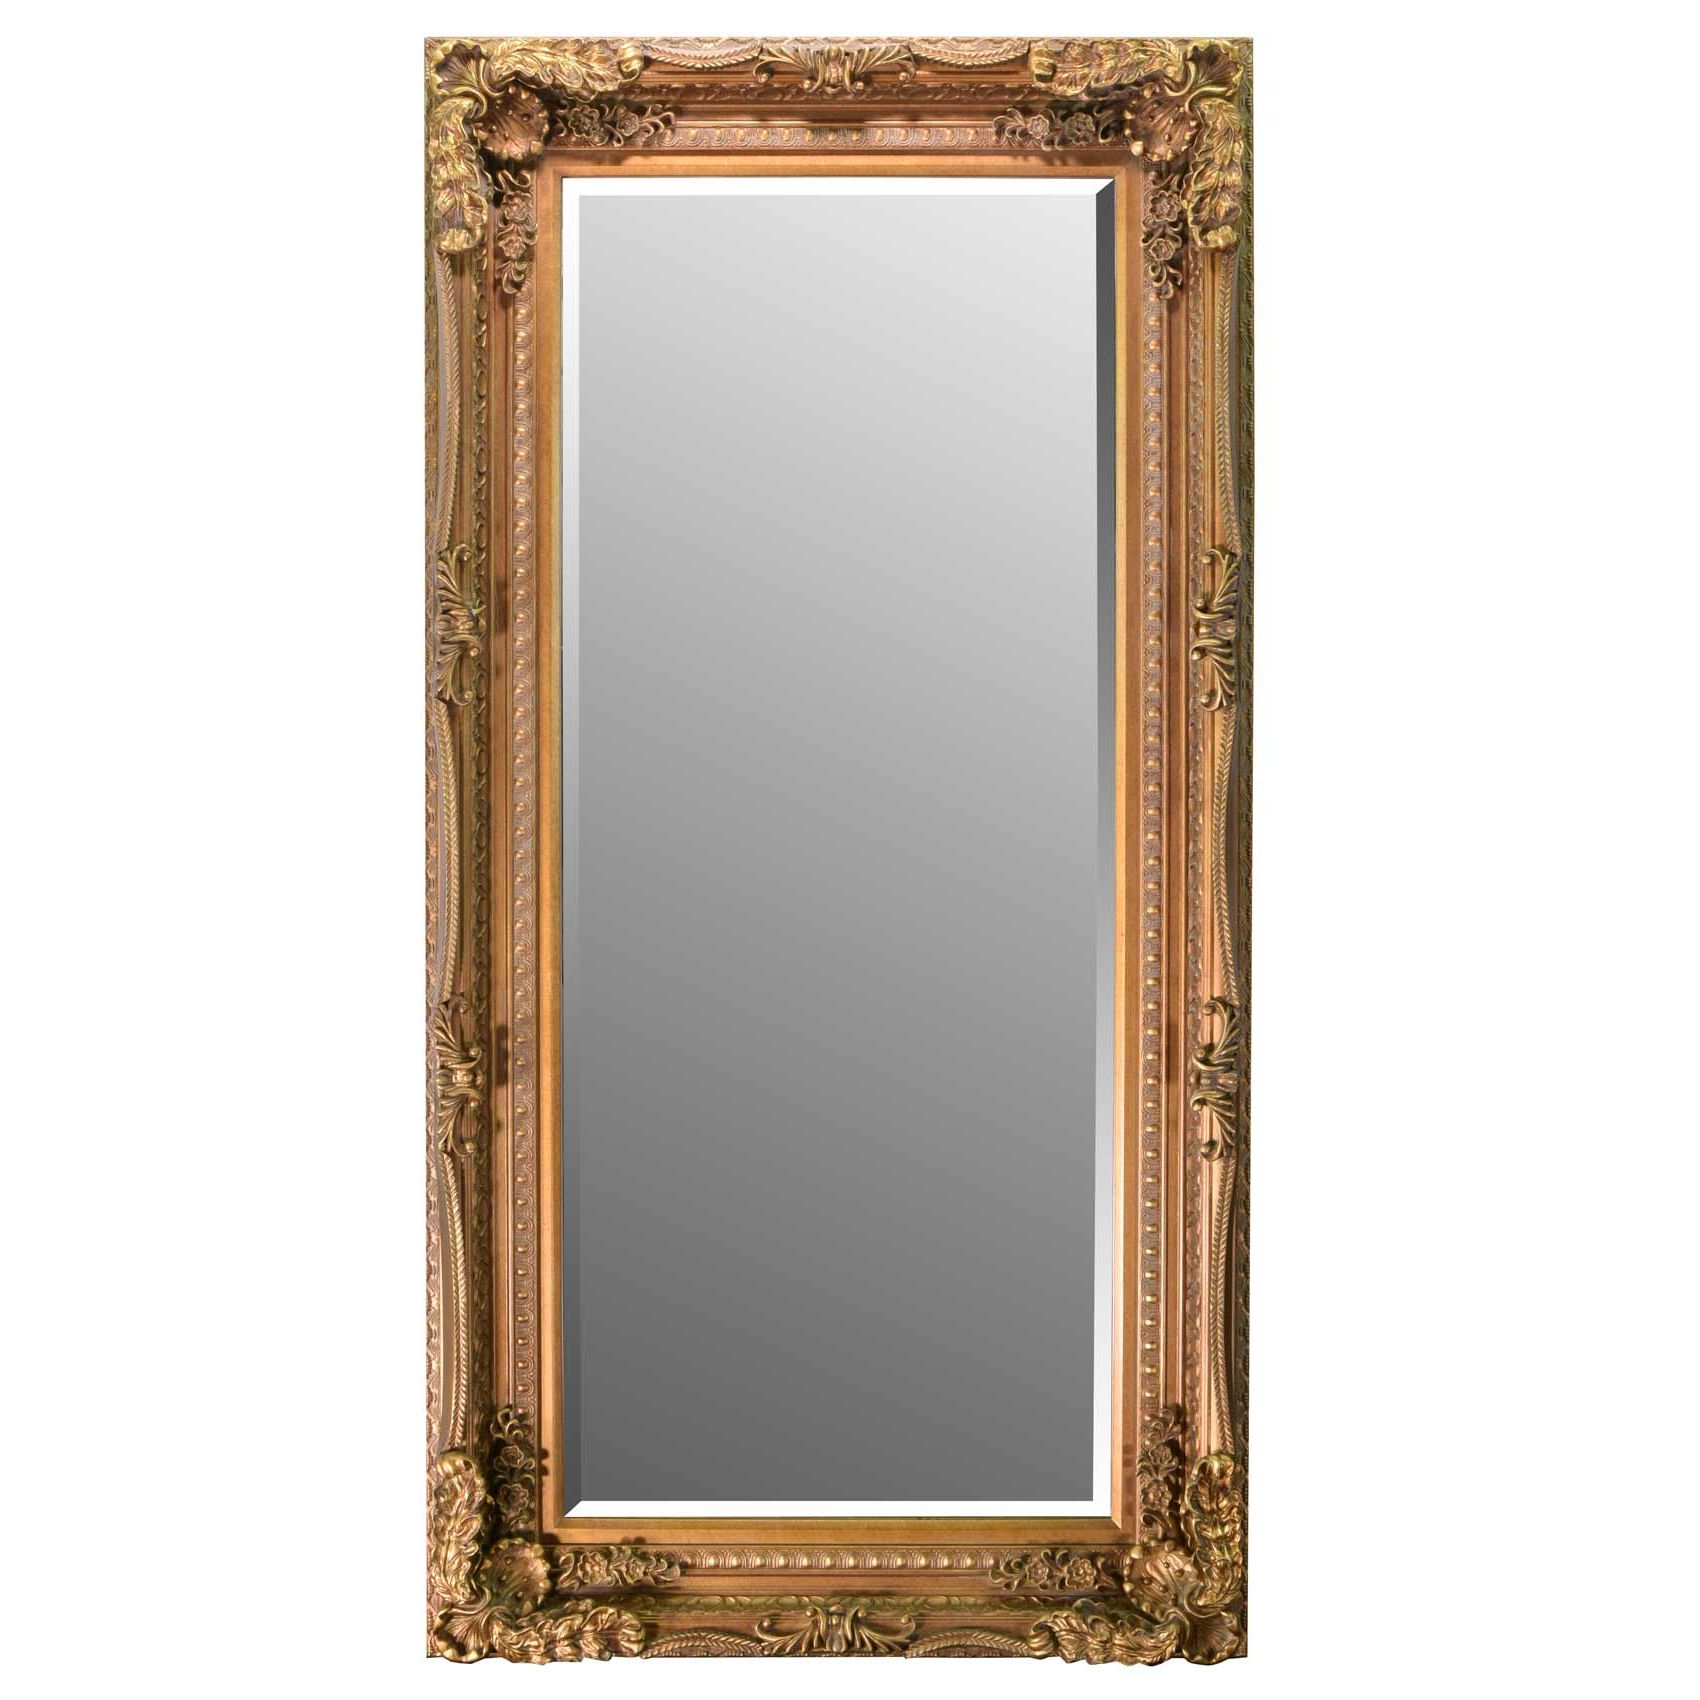 Large Lois Leaner Antique Full Length Gold Wall Mirror 5ft9 X 2ft11 With Widely Used Ultra Brushed Gold Rectangular Framed Wall Mirrors (View 9 of 15)